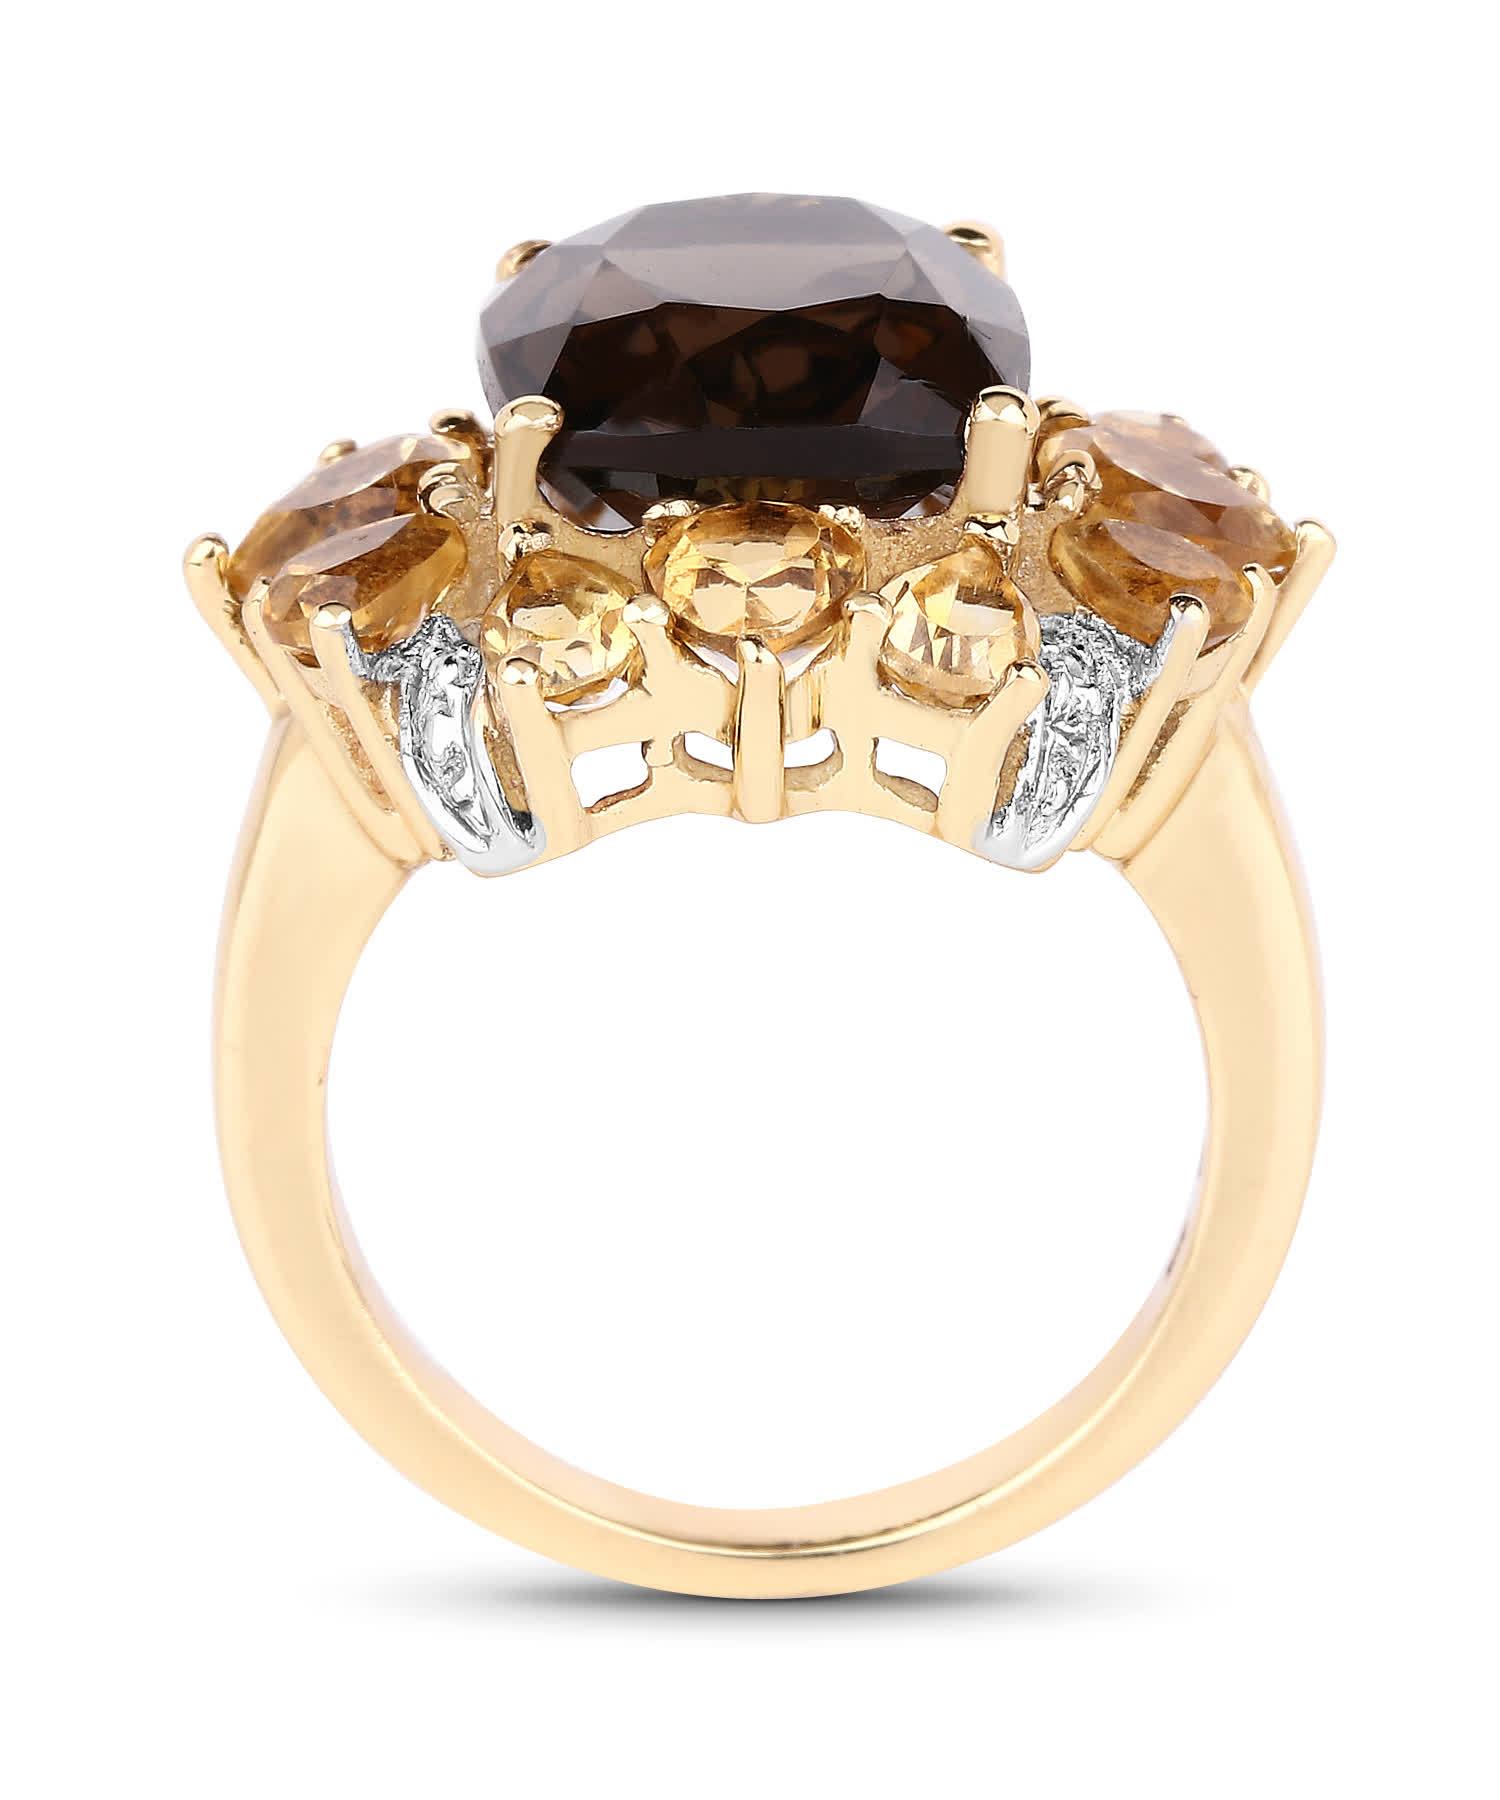 7.10ctw Natural Smoky Quartz, Golden Citrine and Topaz 14k Gold Plated Cocktail Ring View 2